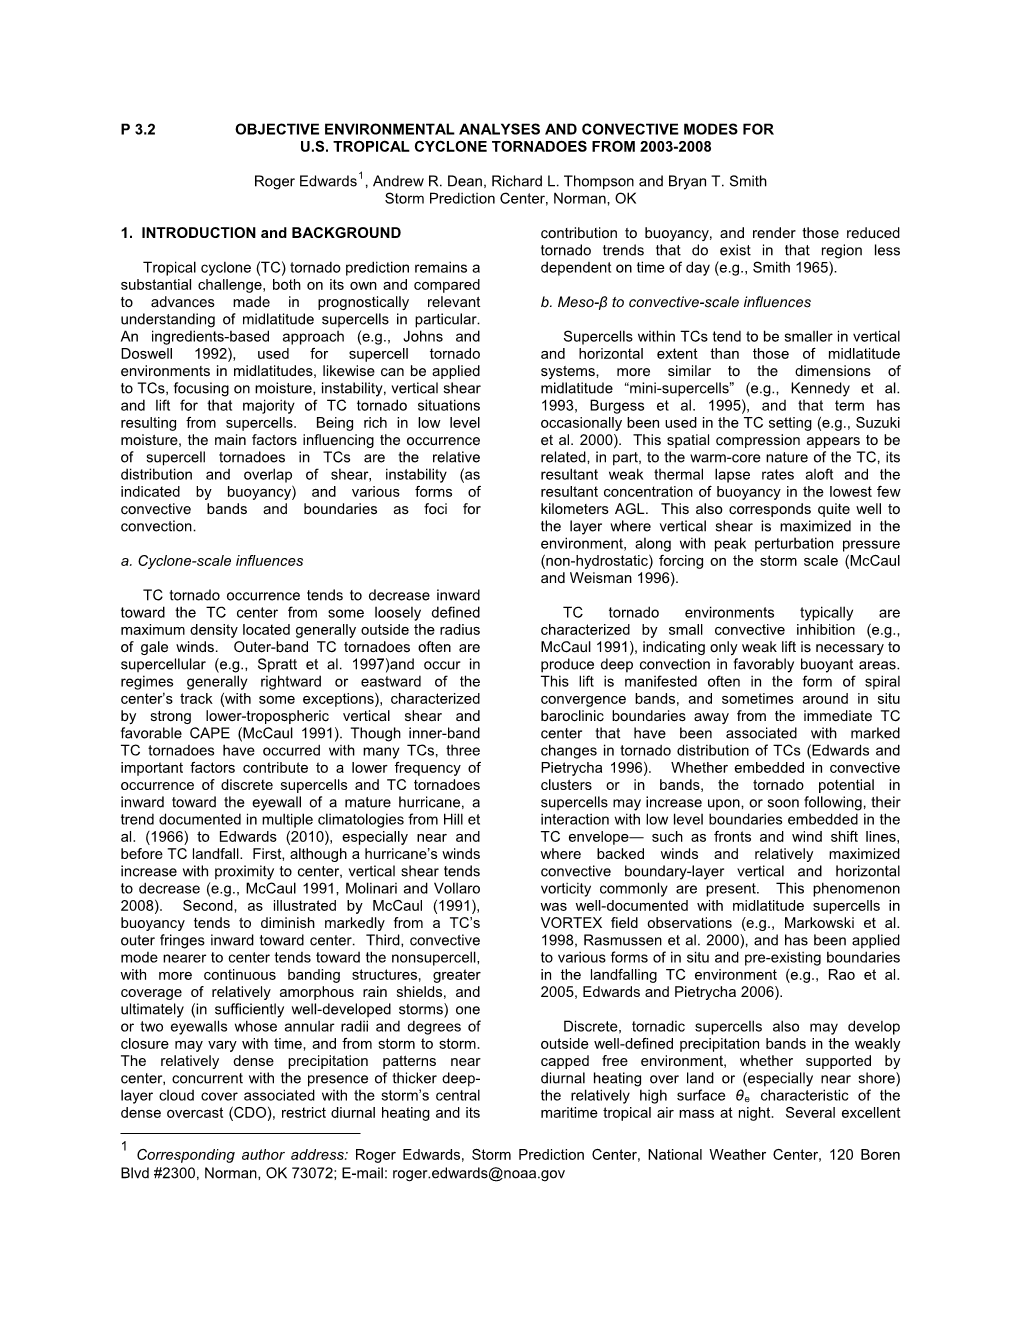 P>P 3.2 OBJECTIVE ENVIRONMENTAL ANALYSES and CONVECTIVE MODES for U.S